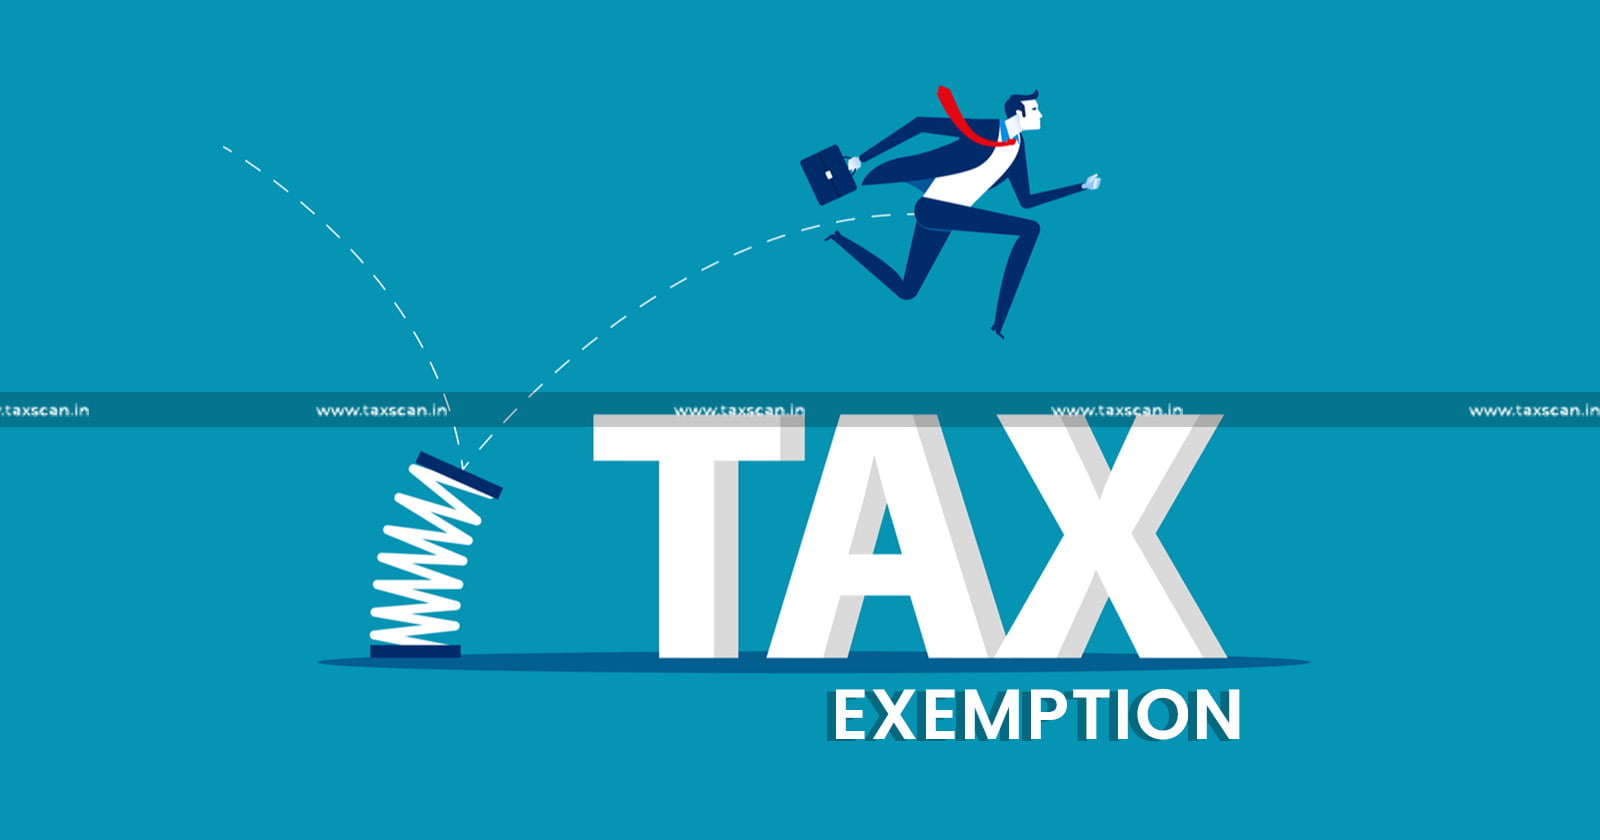 Income Tax Exemption - Income Tax - Voluntary Payment - Payment - Employer - Employee - ITAT - Taxscan